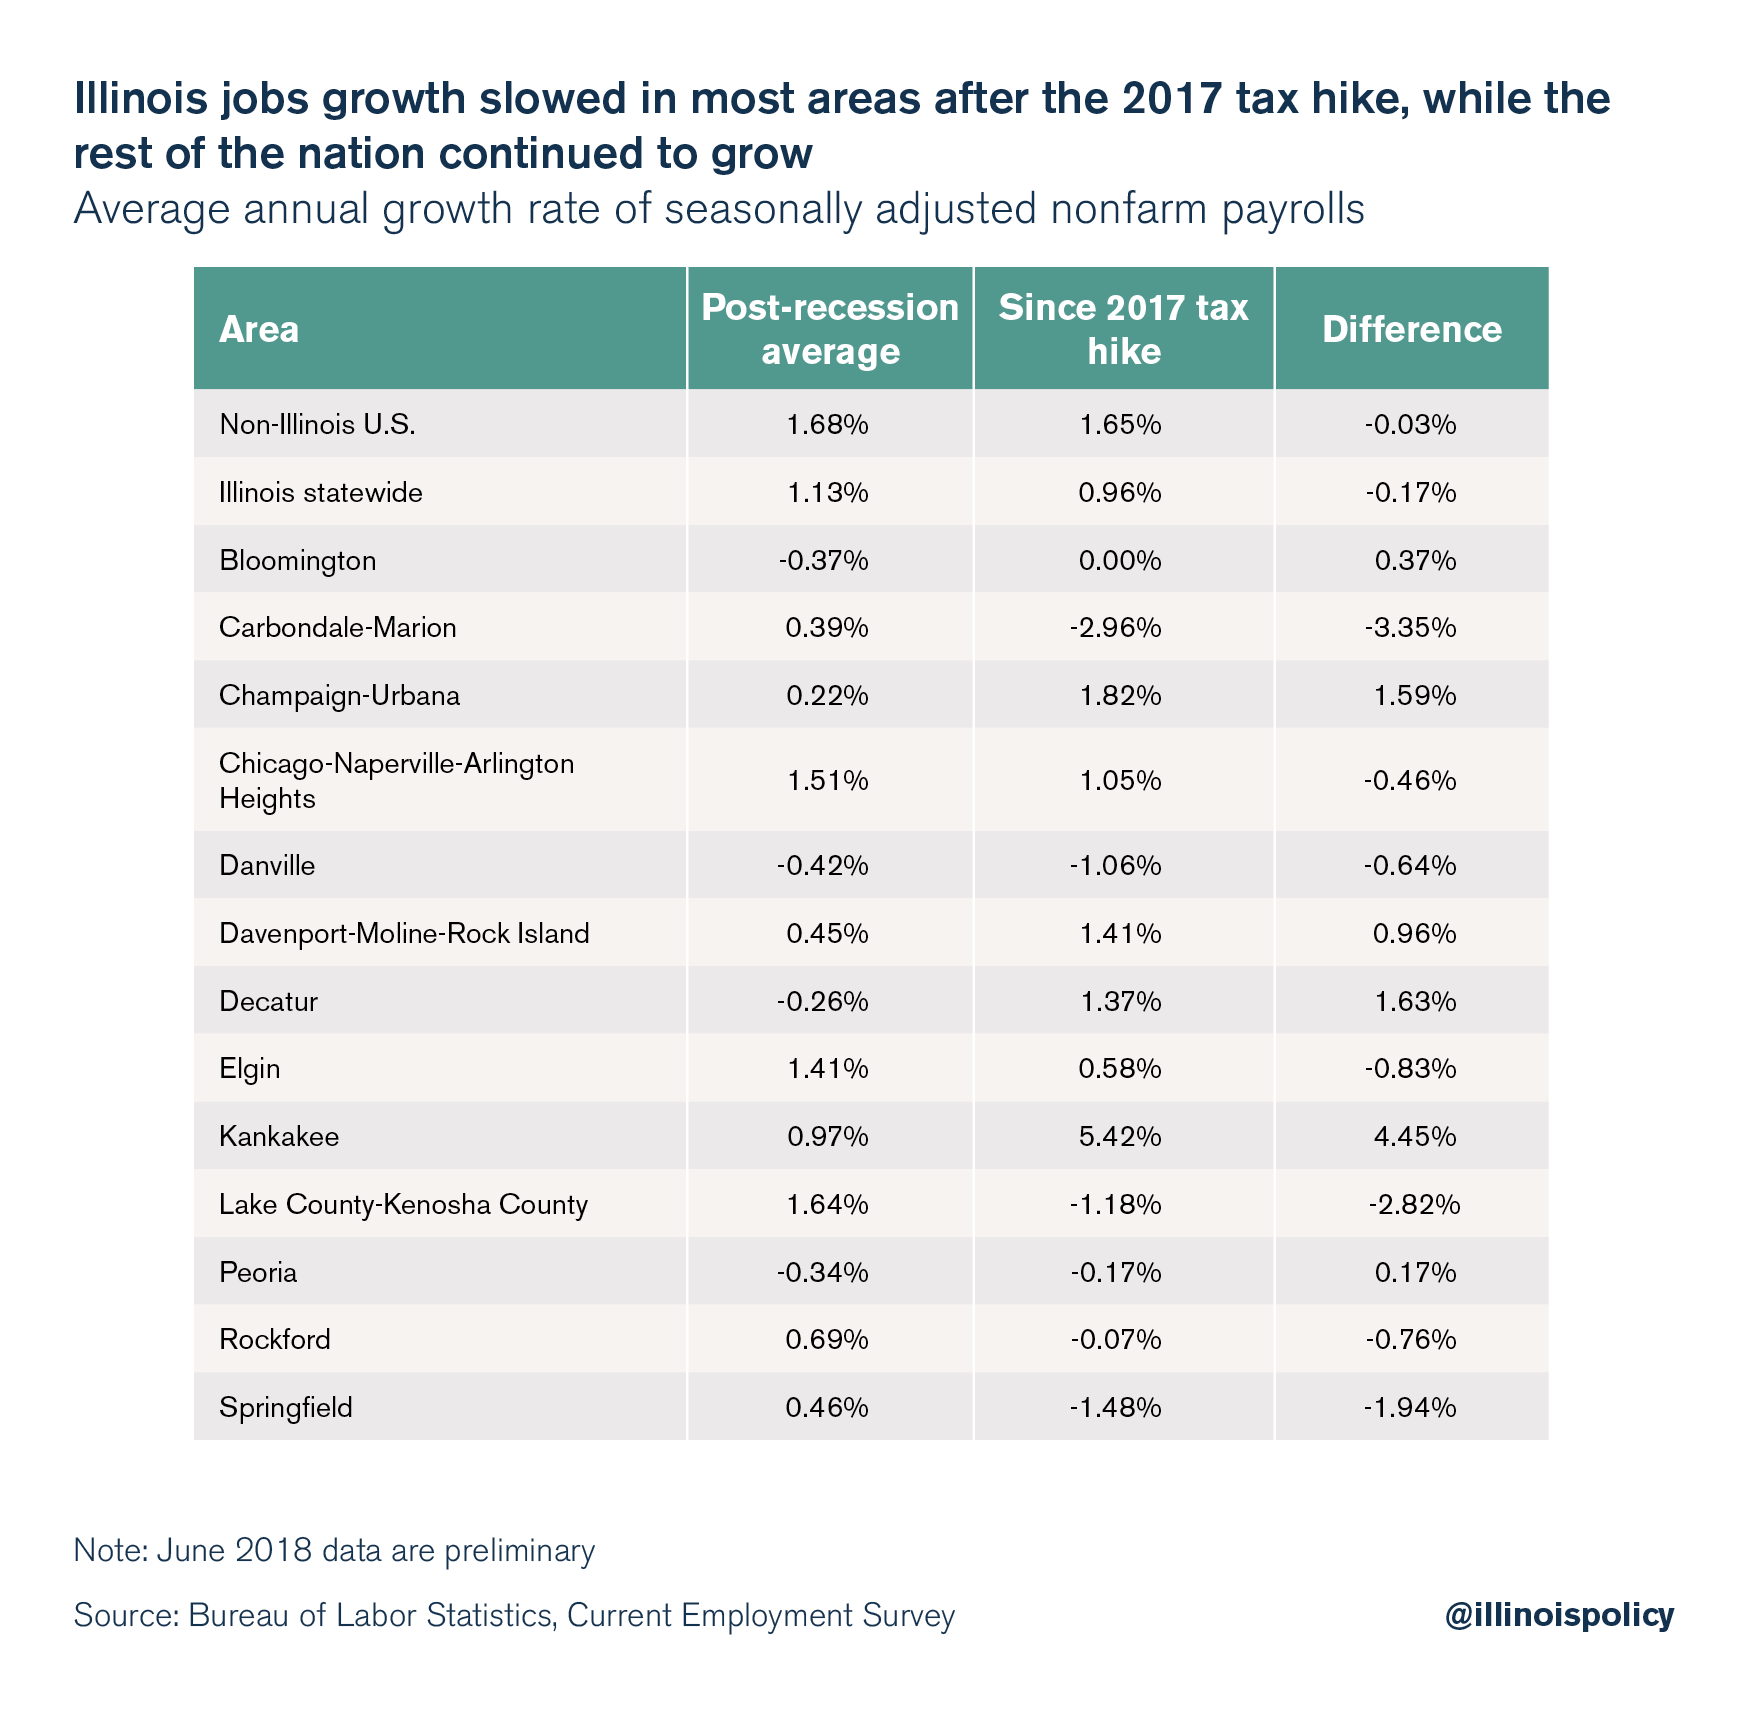 Illinois jobs growth slowed in most areas after the 2017 tax hike, while the rest of the nation continued to grow